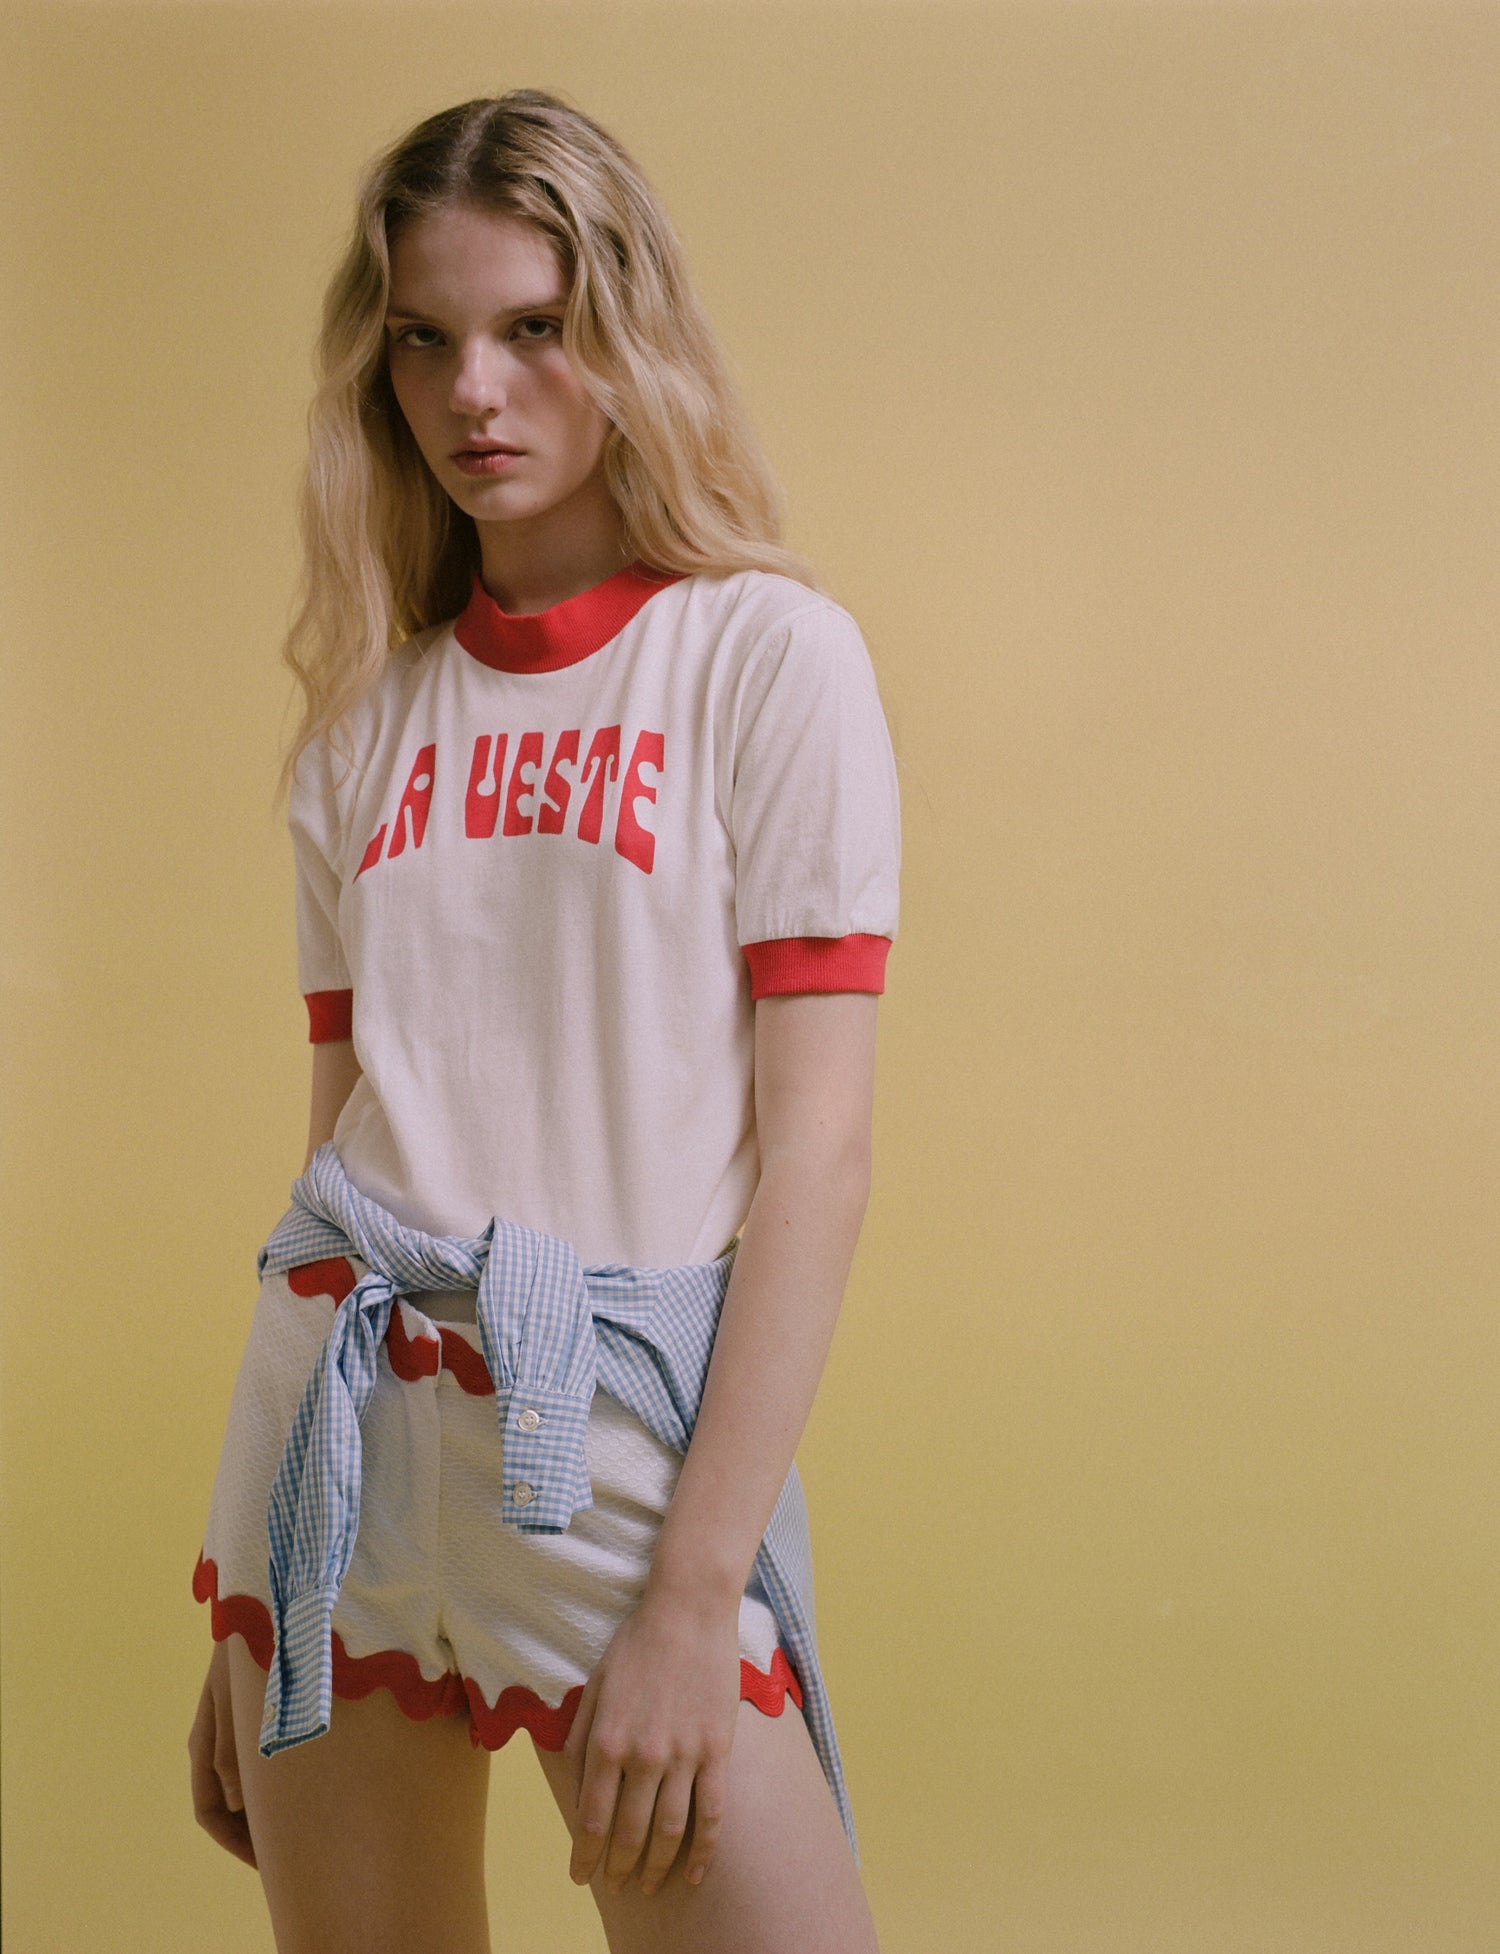 Model wearing a vintage La Veste logo shirt and white shorts with red trim.